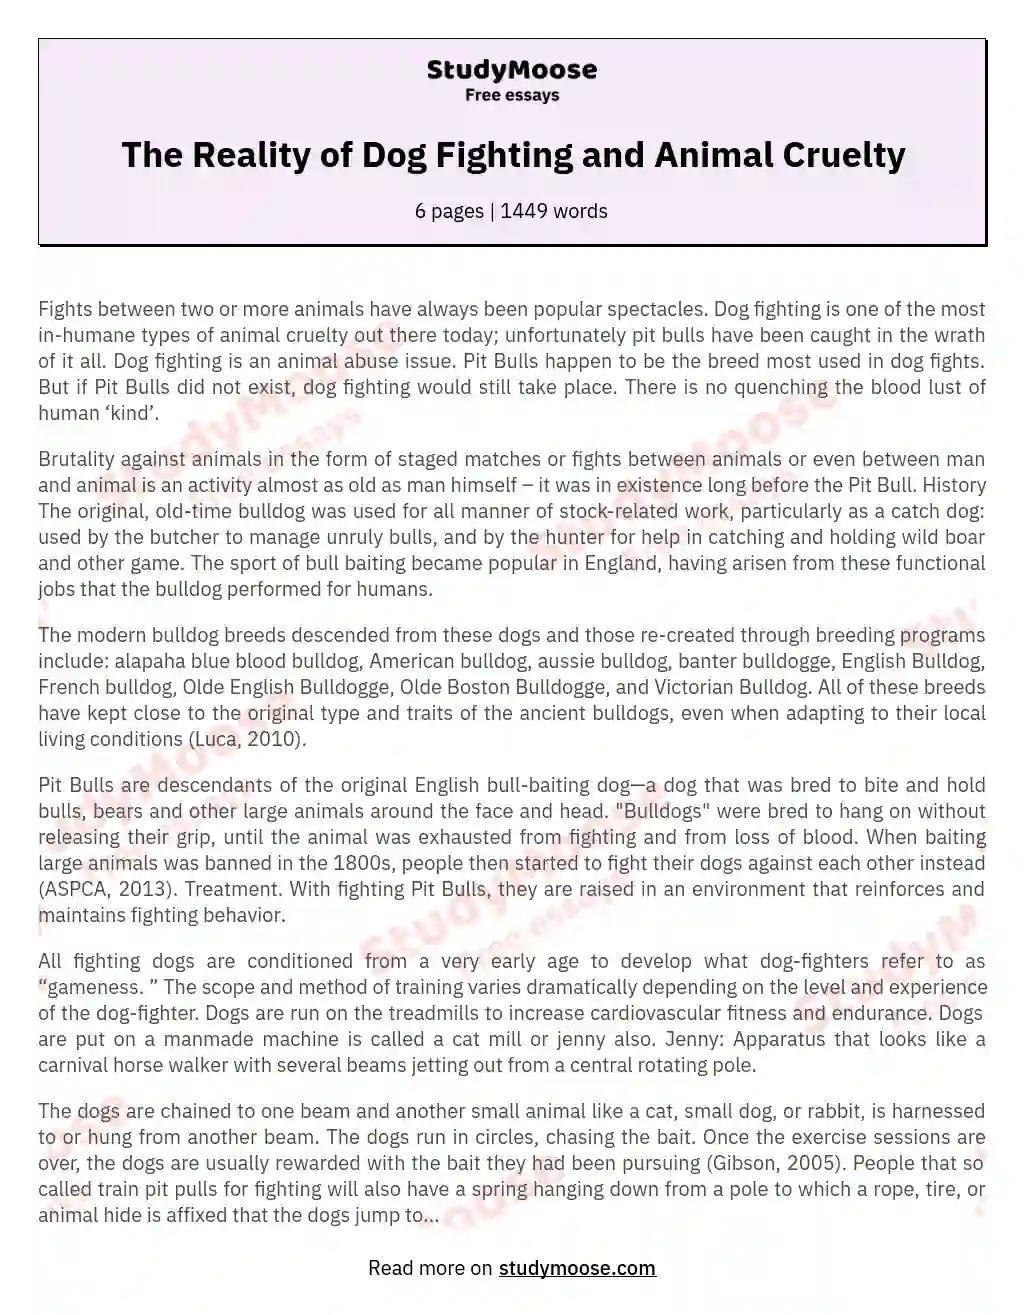 The Reality of Dog Fighting and Animal Cruelty essay